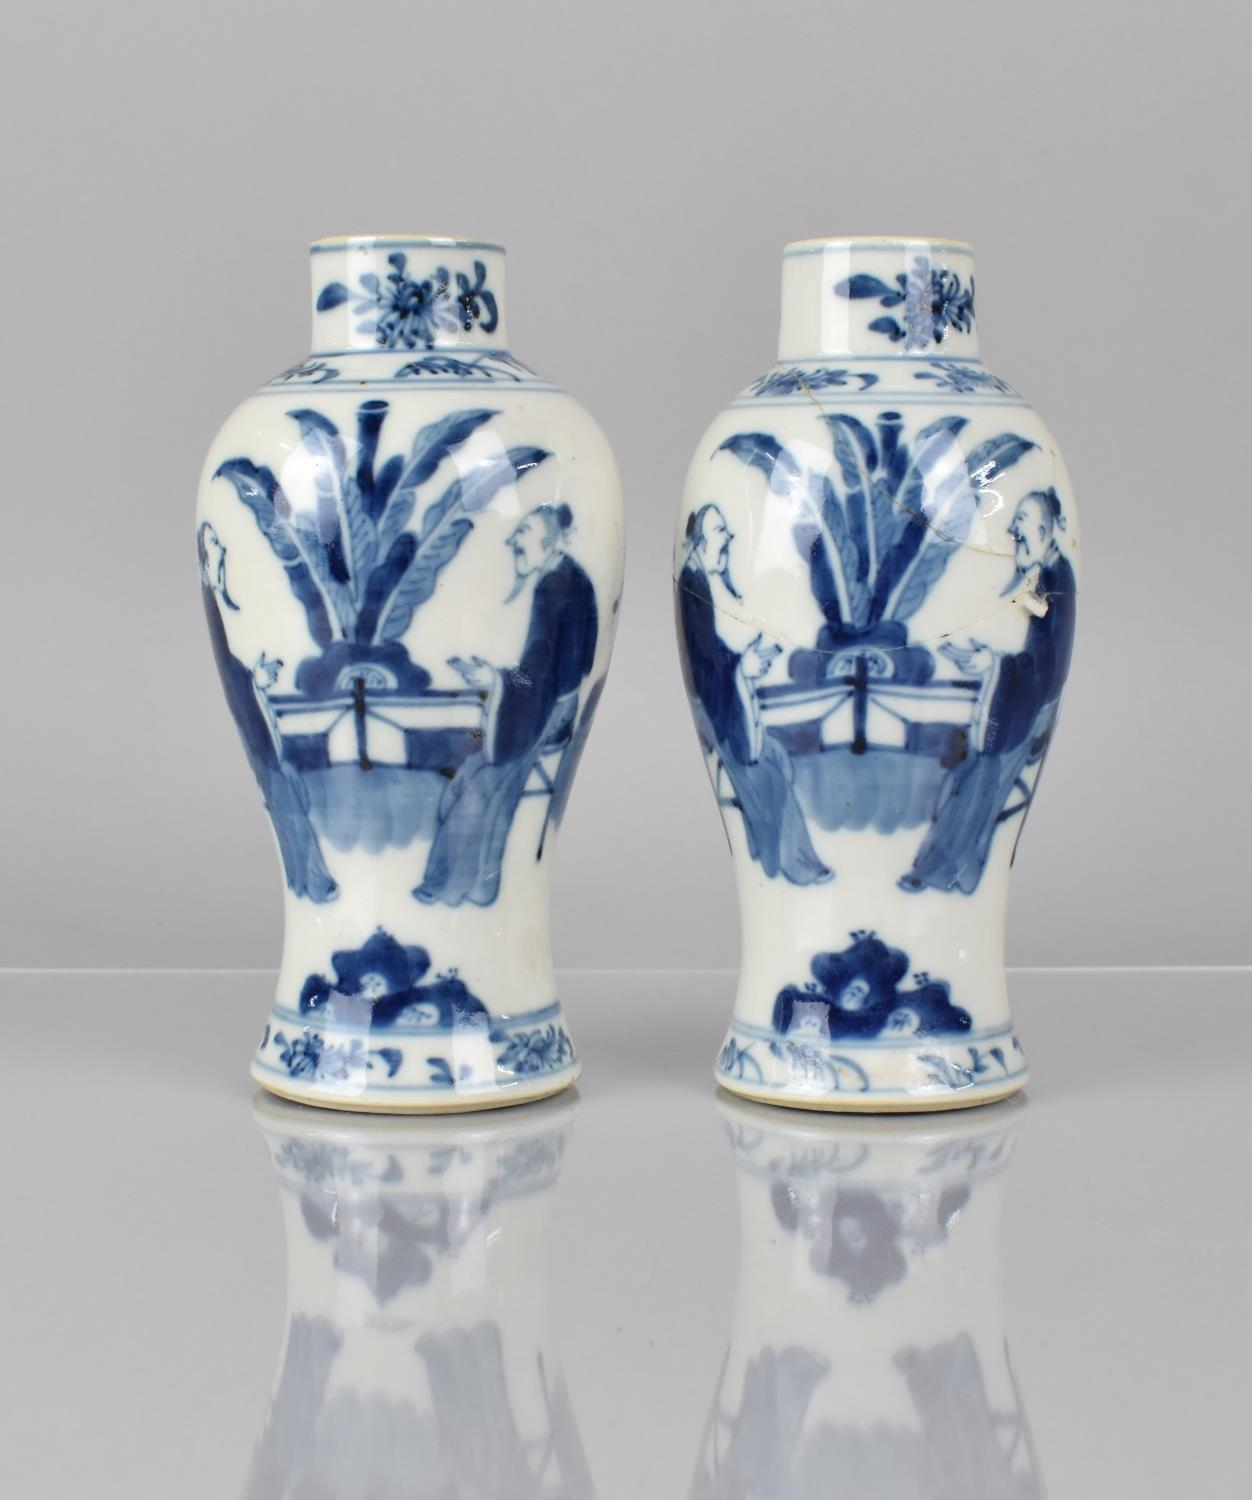 A Pair of 19th Century Chinese Porcelain Blue and White Vases decorated with Scholars in Garden - Image 2 of 6